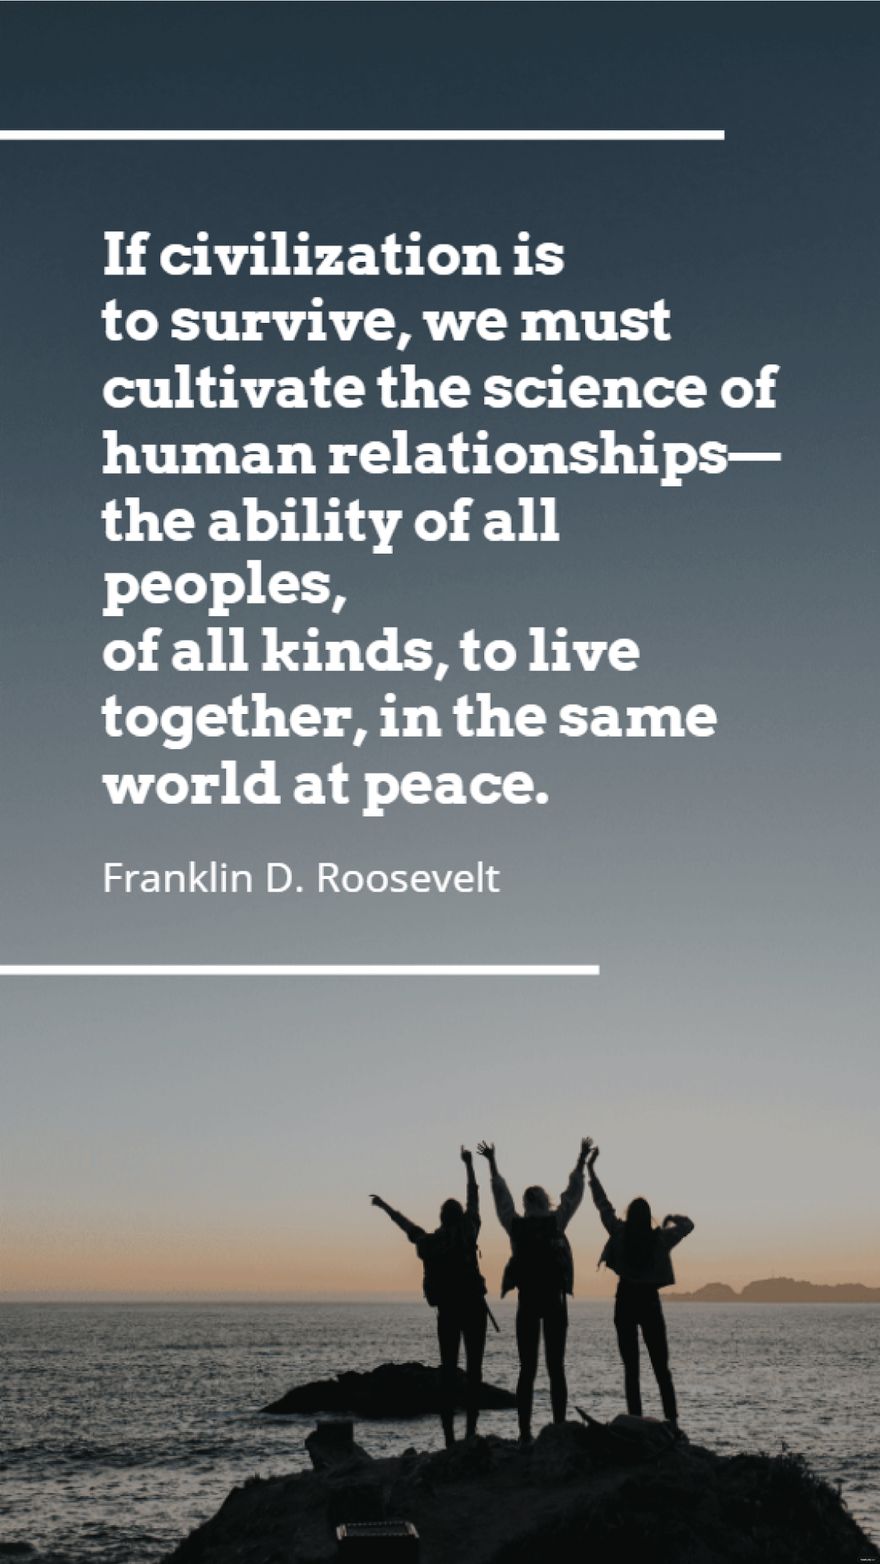 Franklin D. Roosevelt - If civilization is to survive, we must cultivate the science of human relationships - the ability of all peoples, of all kinds, to live together, in the same world at peace.